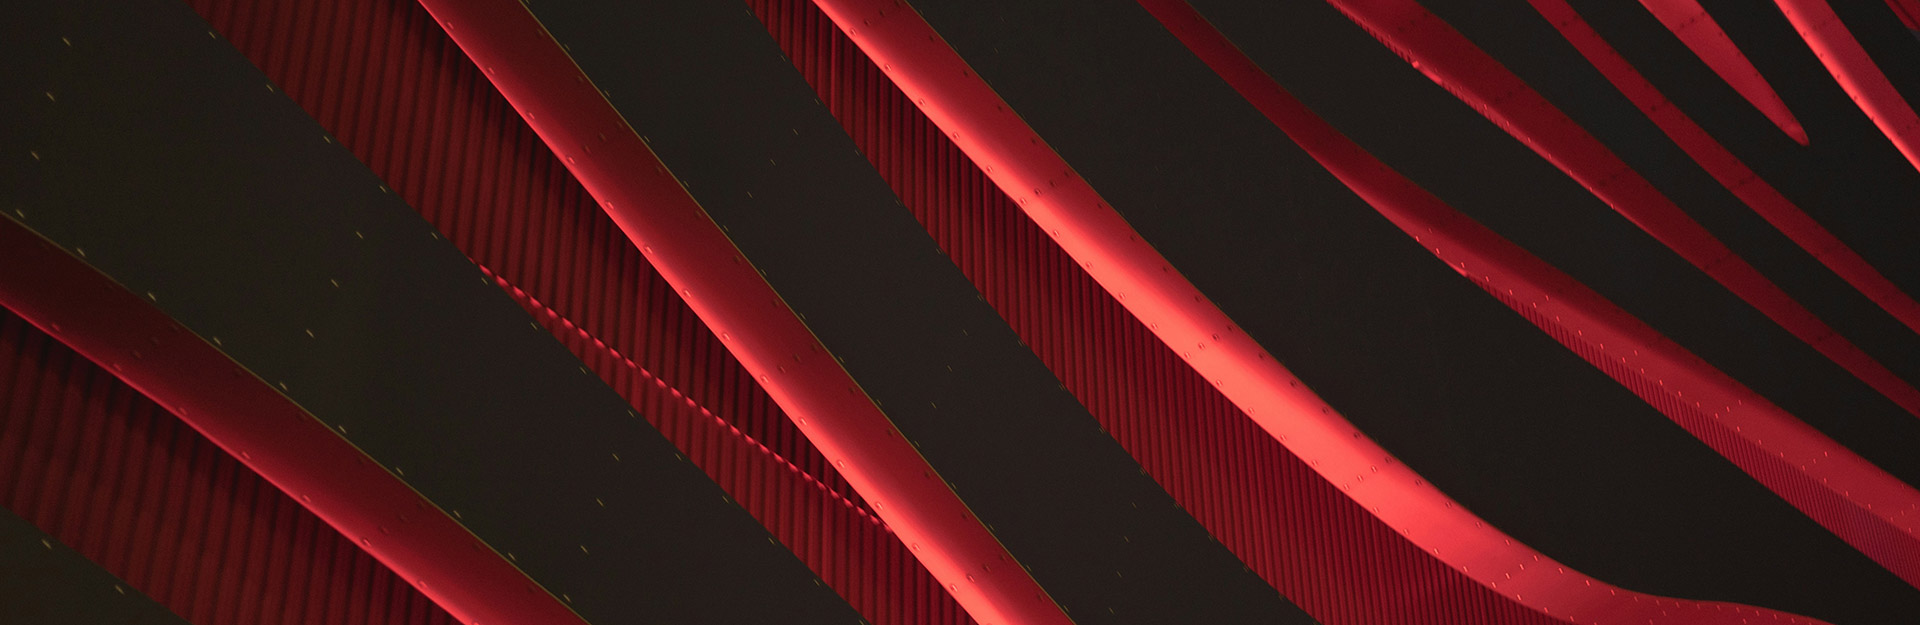 Red lines abstract image